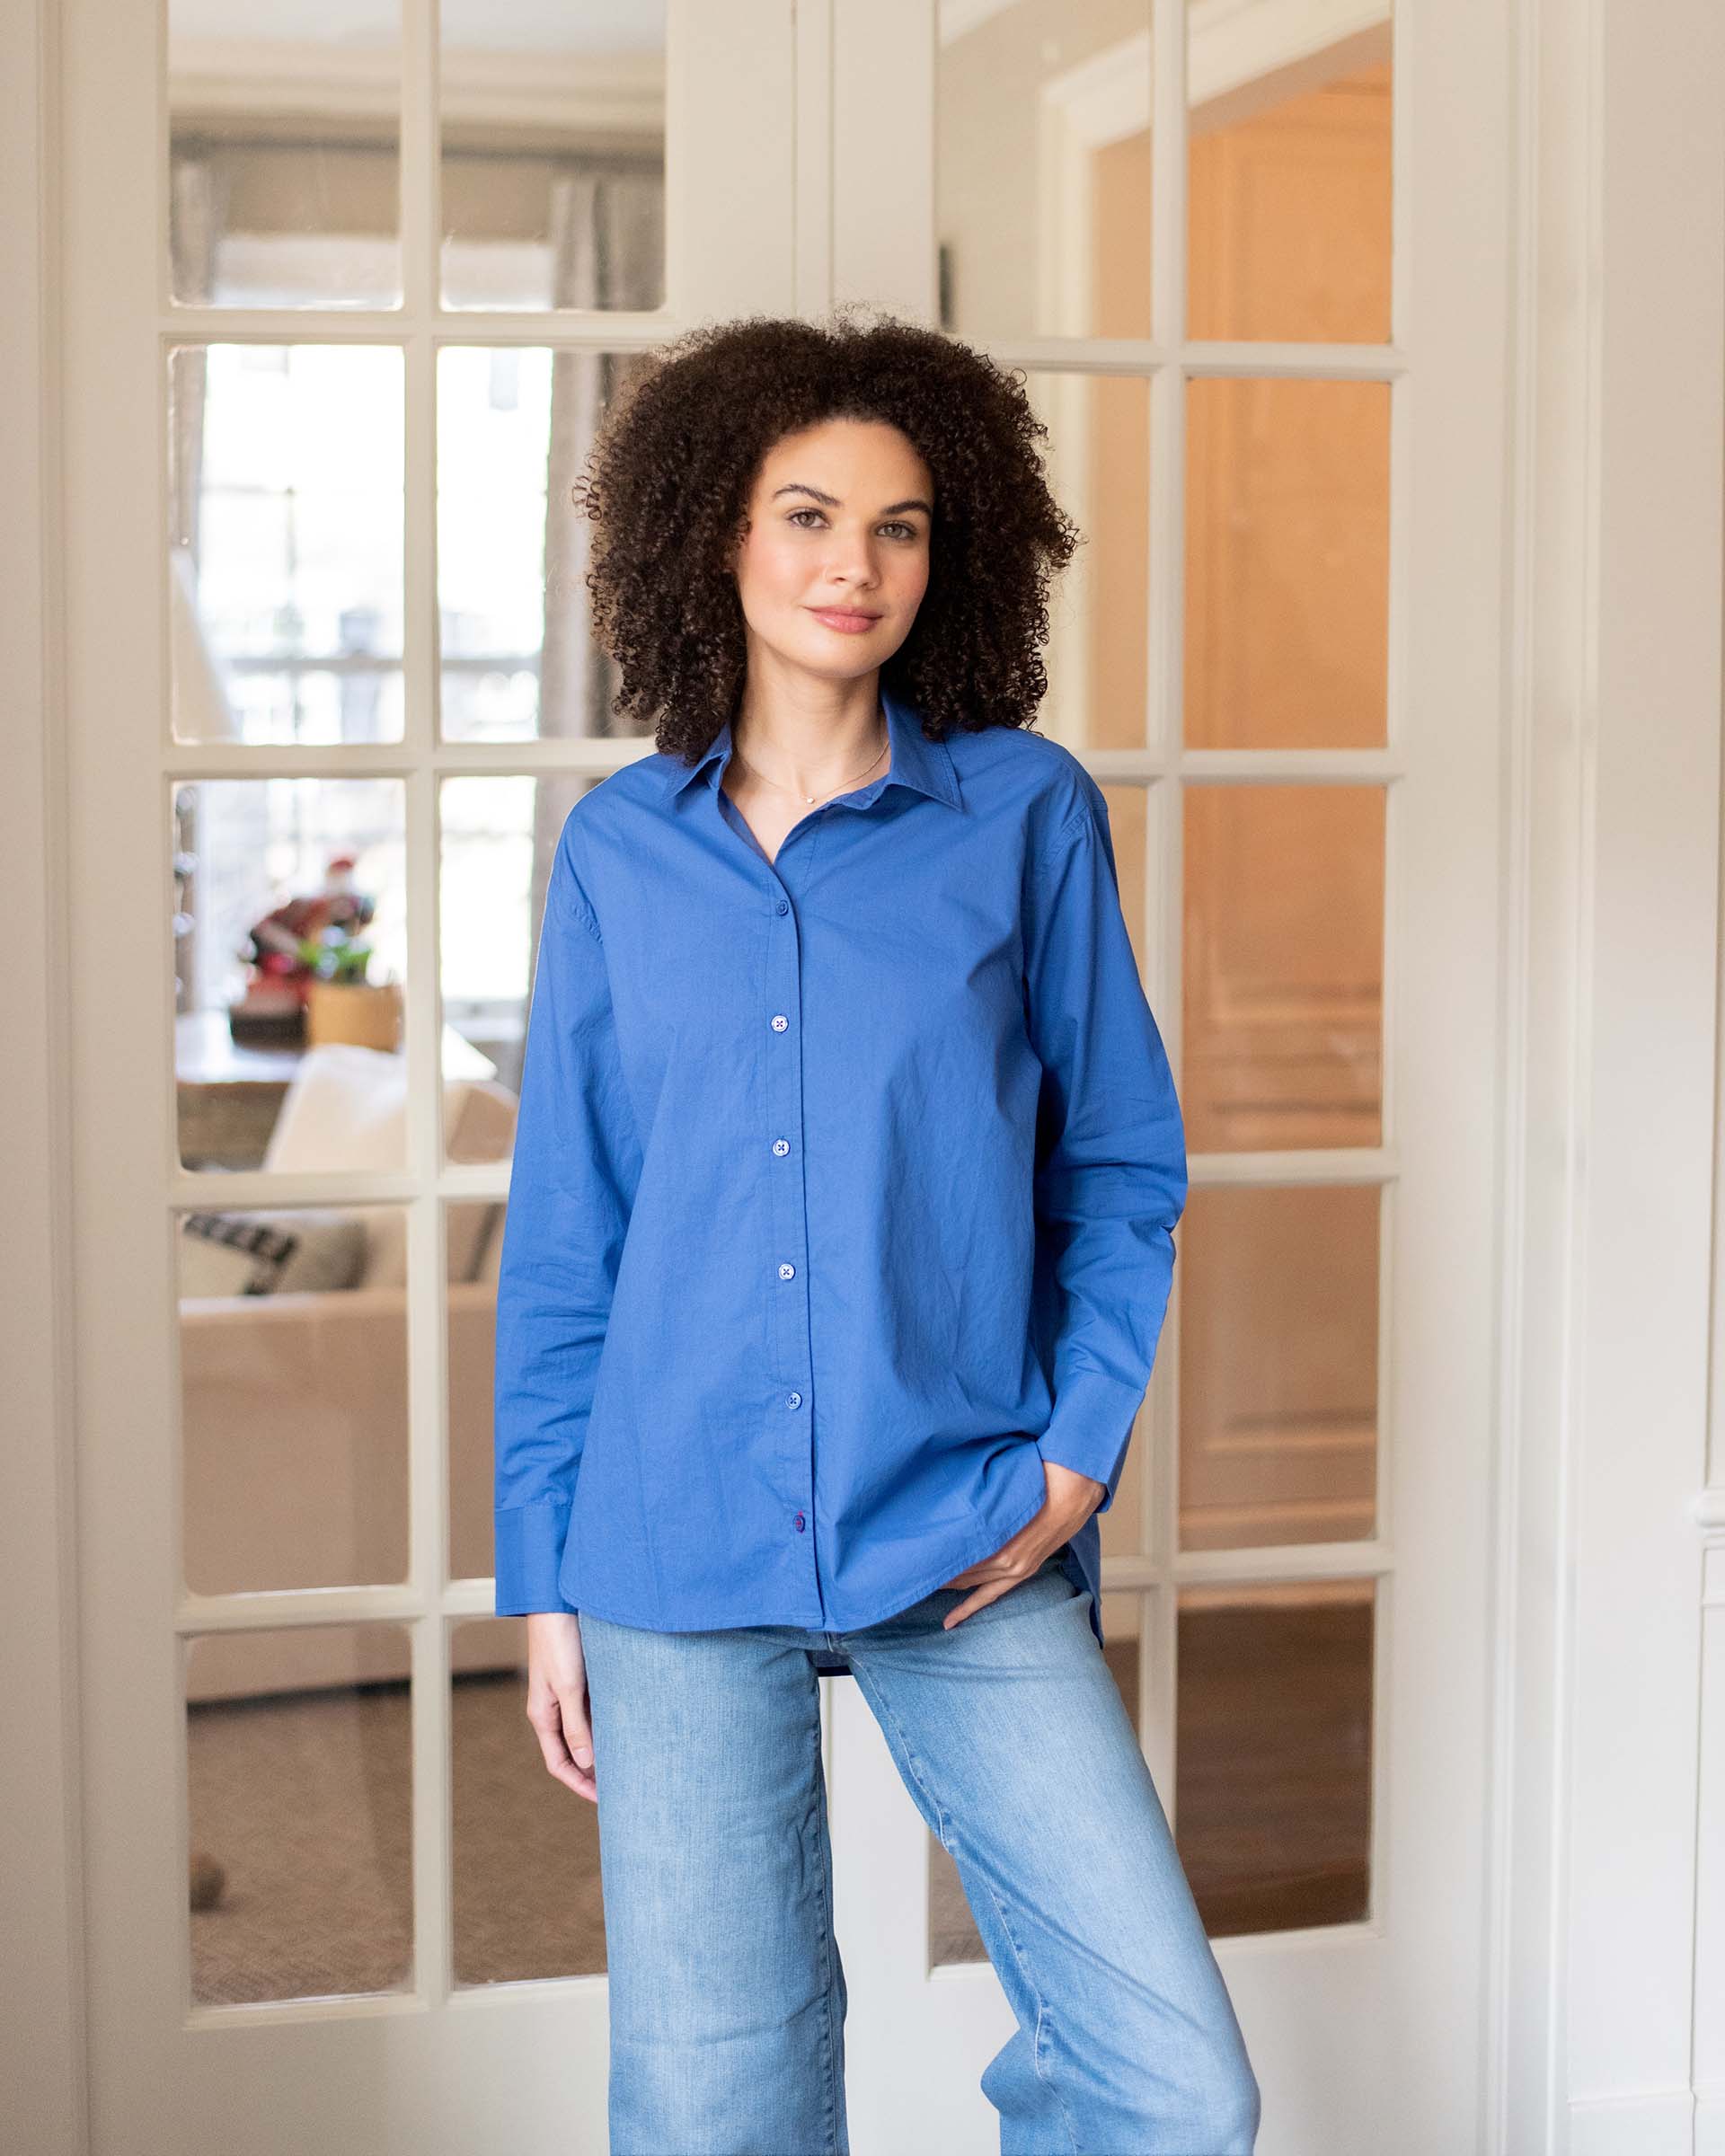 Women's Royal Blue Breathable Relaxed Fit Button Up Shirt Front View Living Room